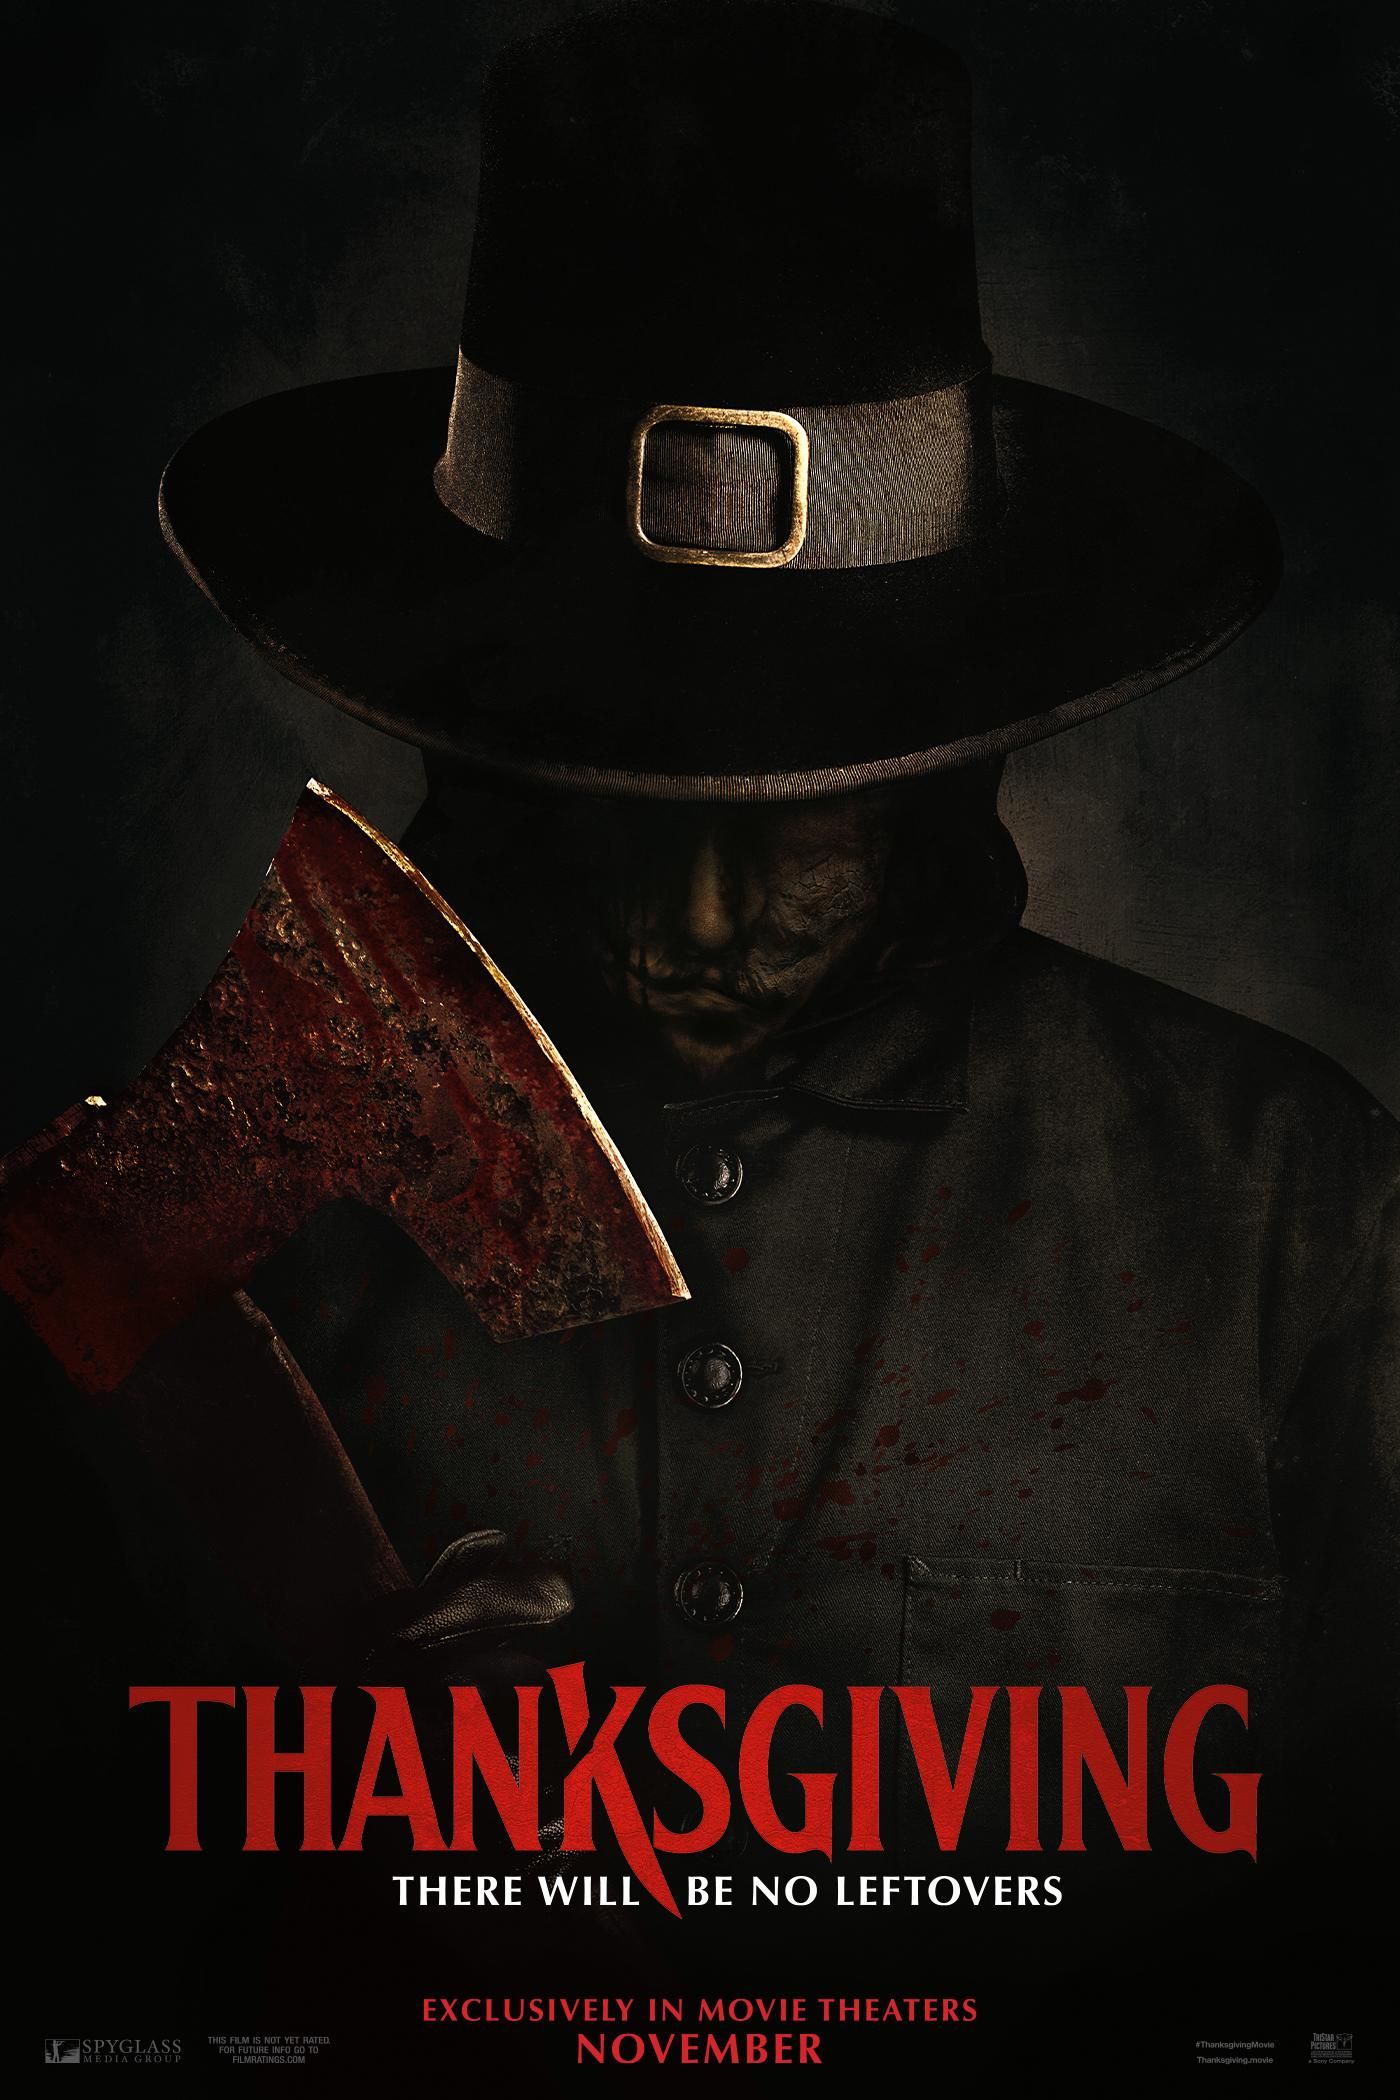 Eli Roth’s Thanksgiving Trailer Resulted In A New Slasher Film